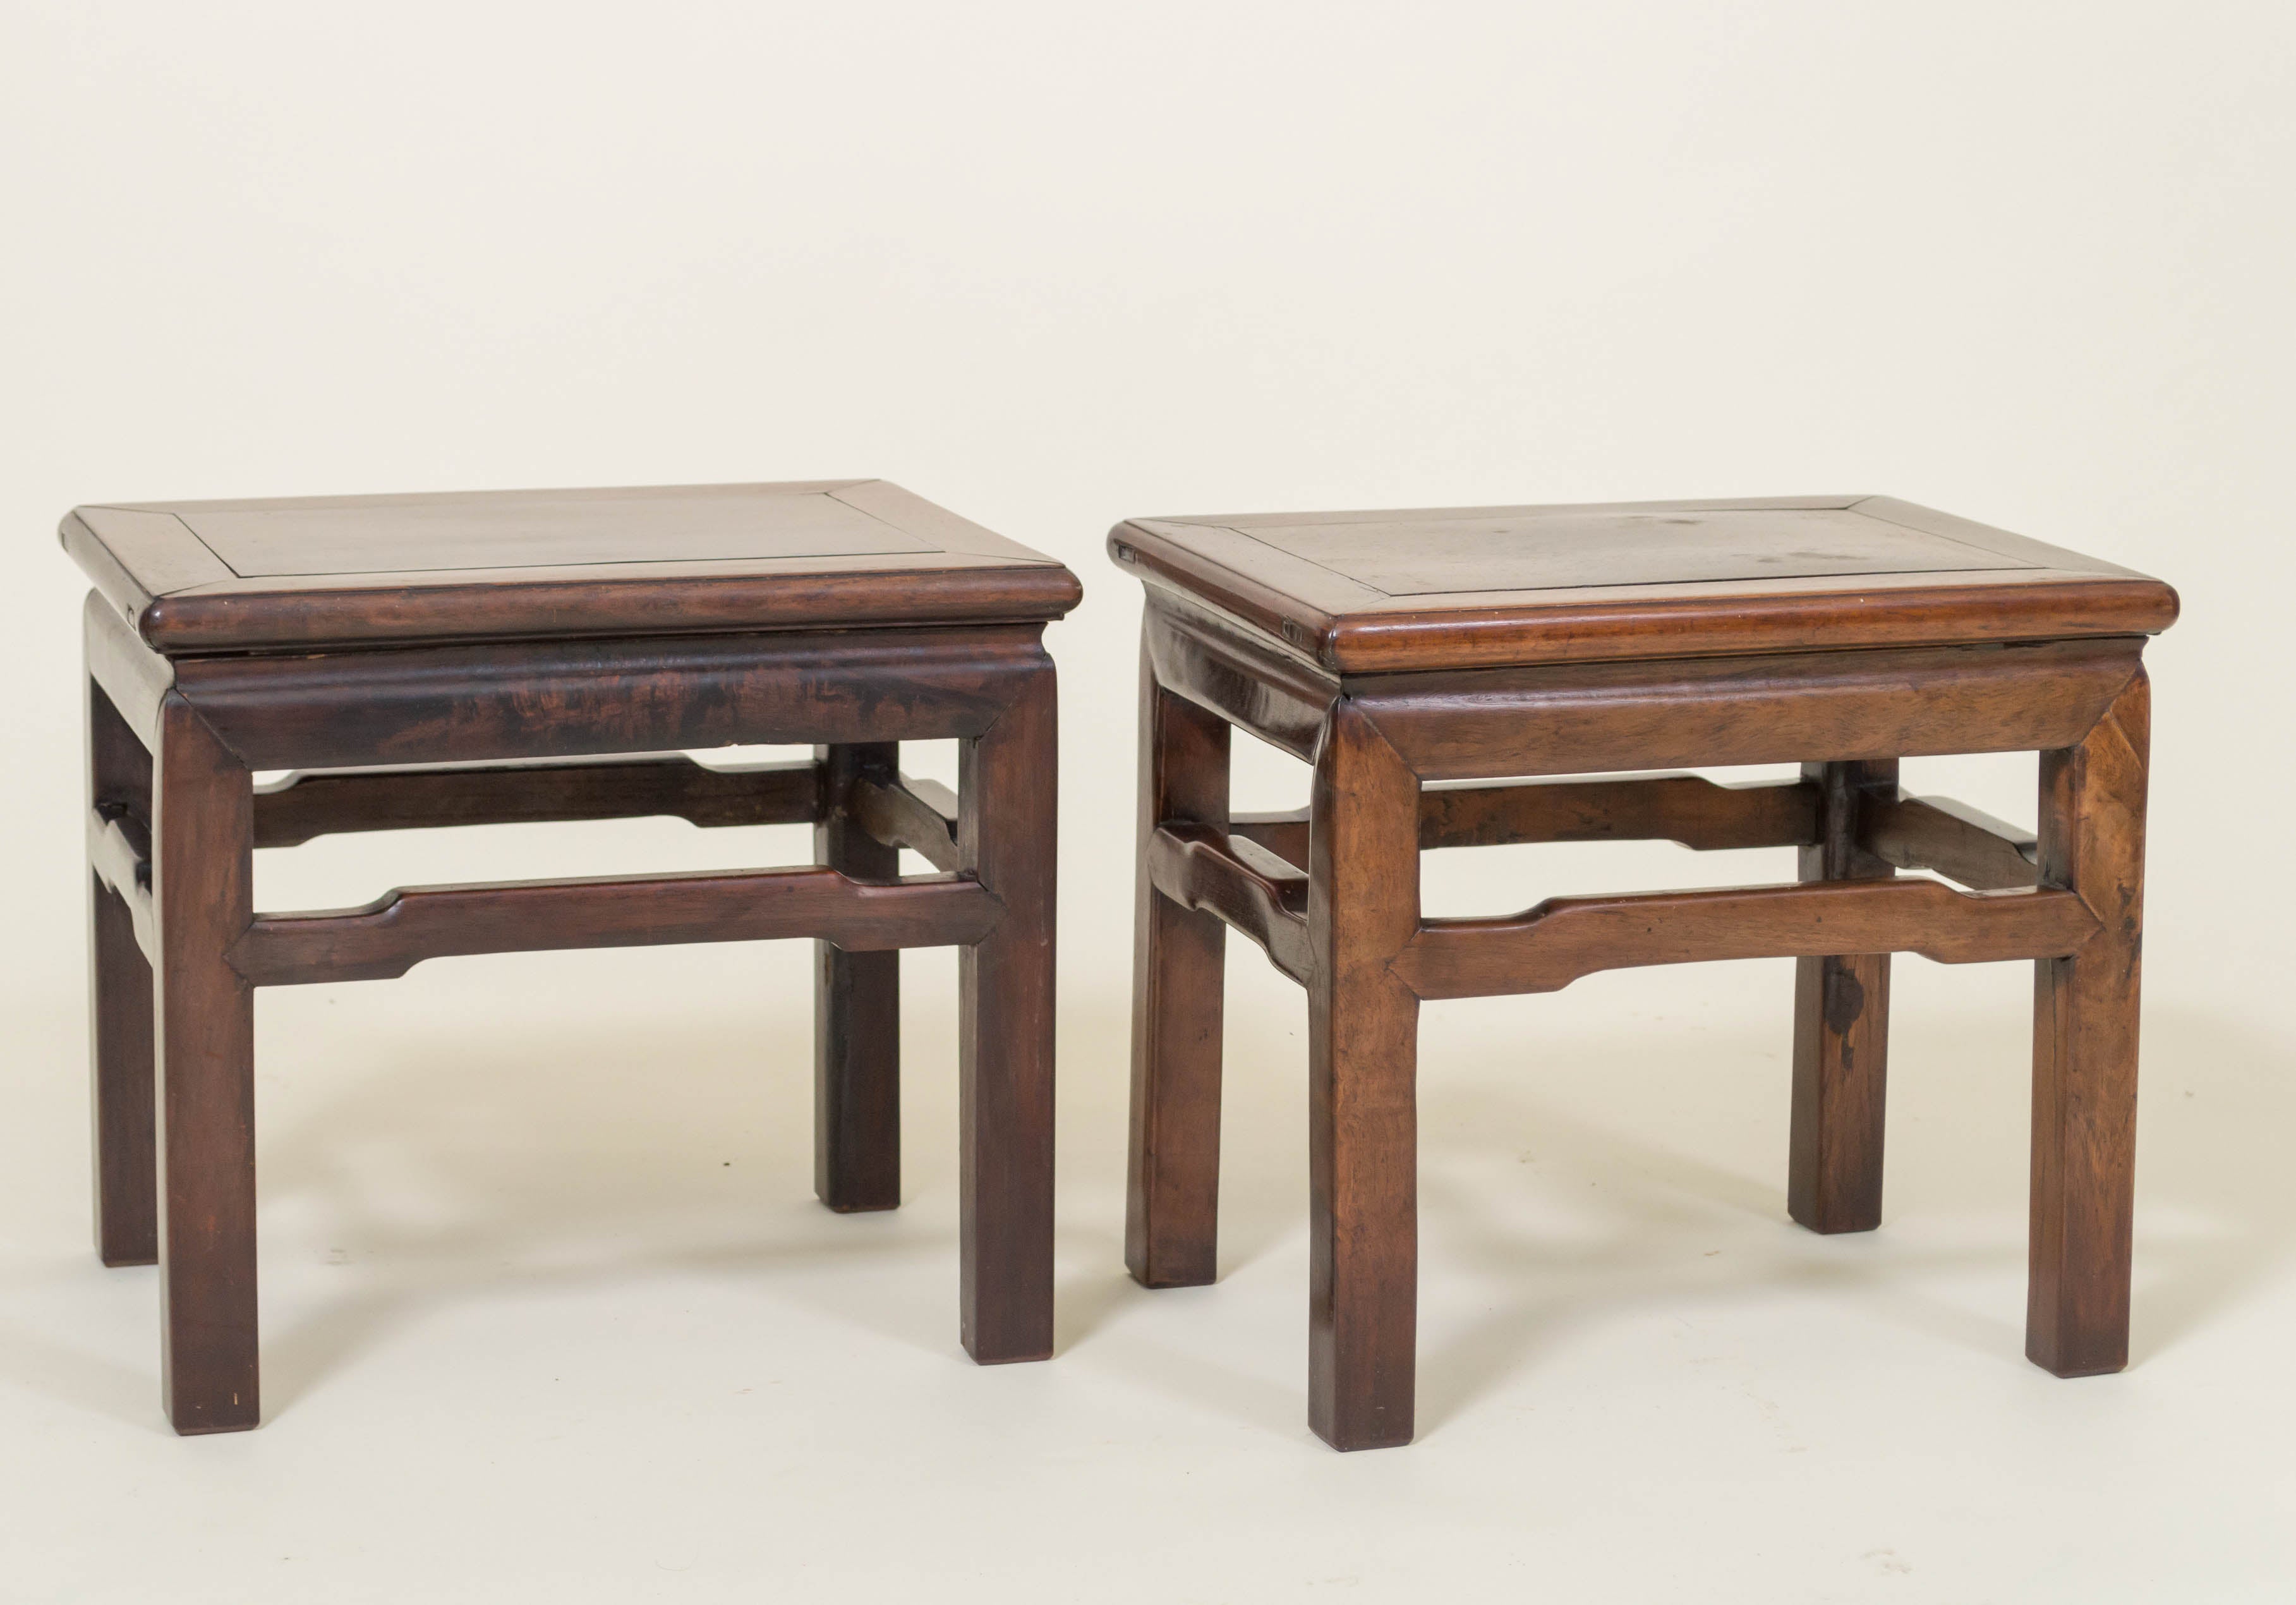 Pair of Chinese Rosewood Low Tables, circa 1900